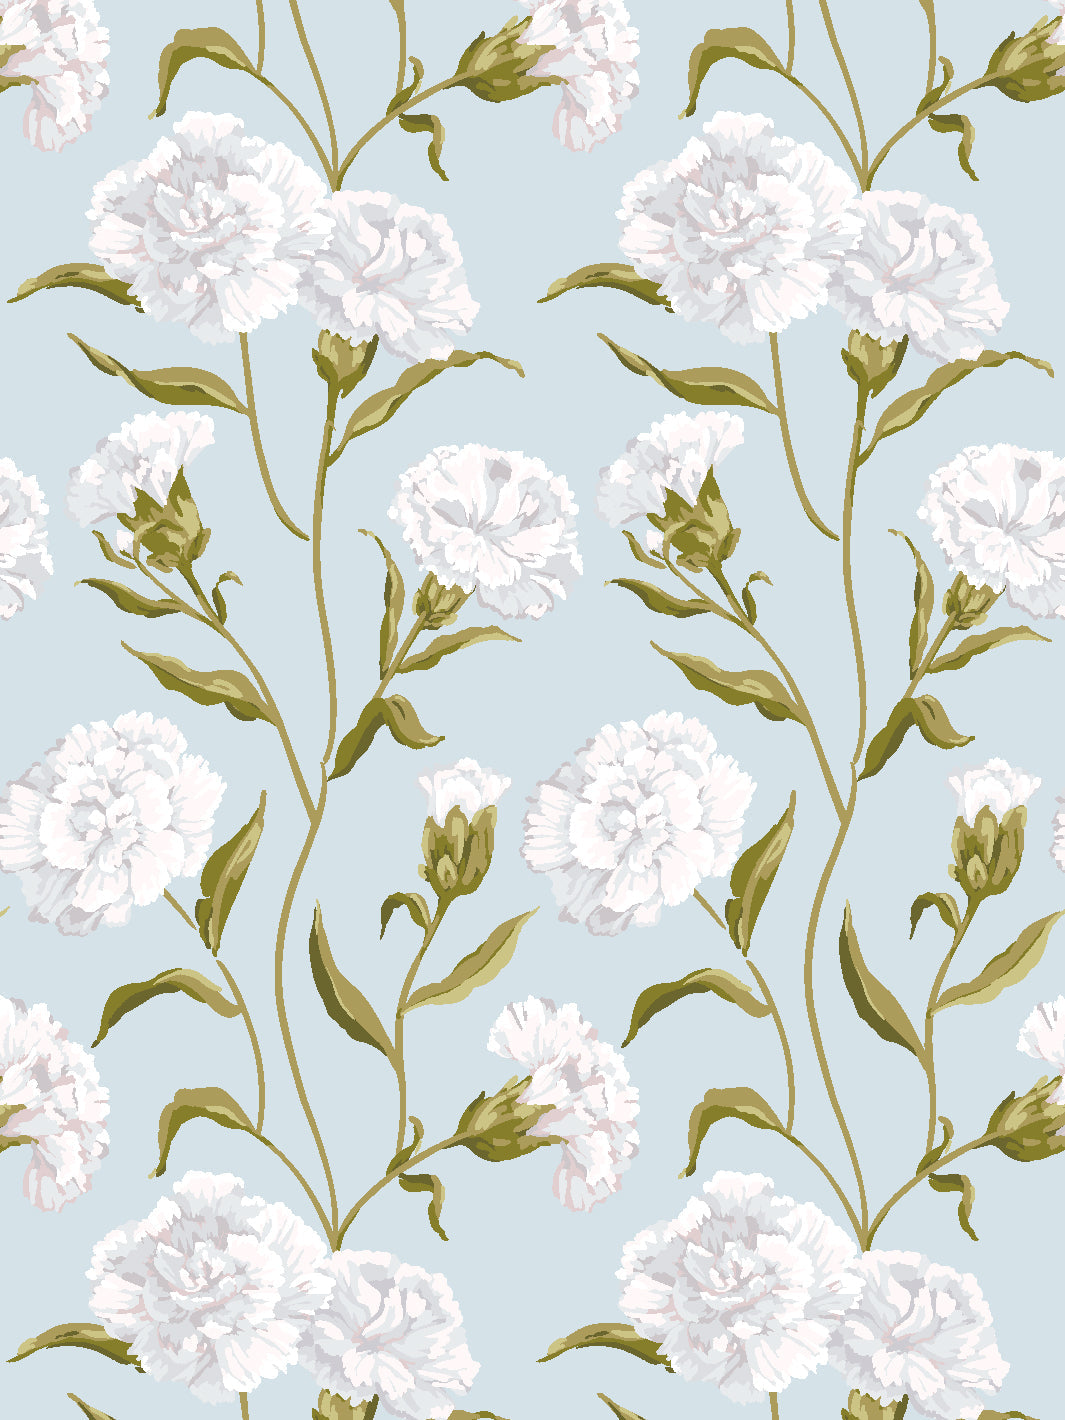 'Townhouse Mural' Wallpaper by Sarah Jessica Parker - Morning Dew on Misty Blue